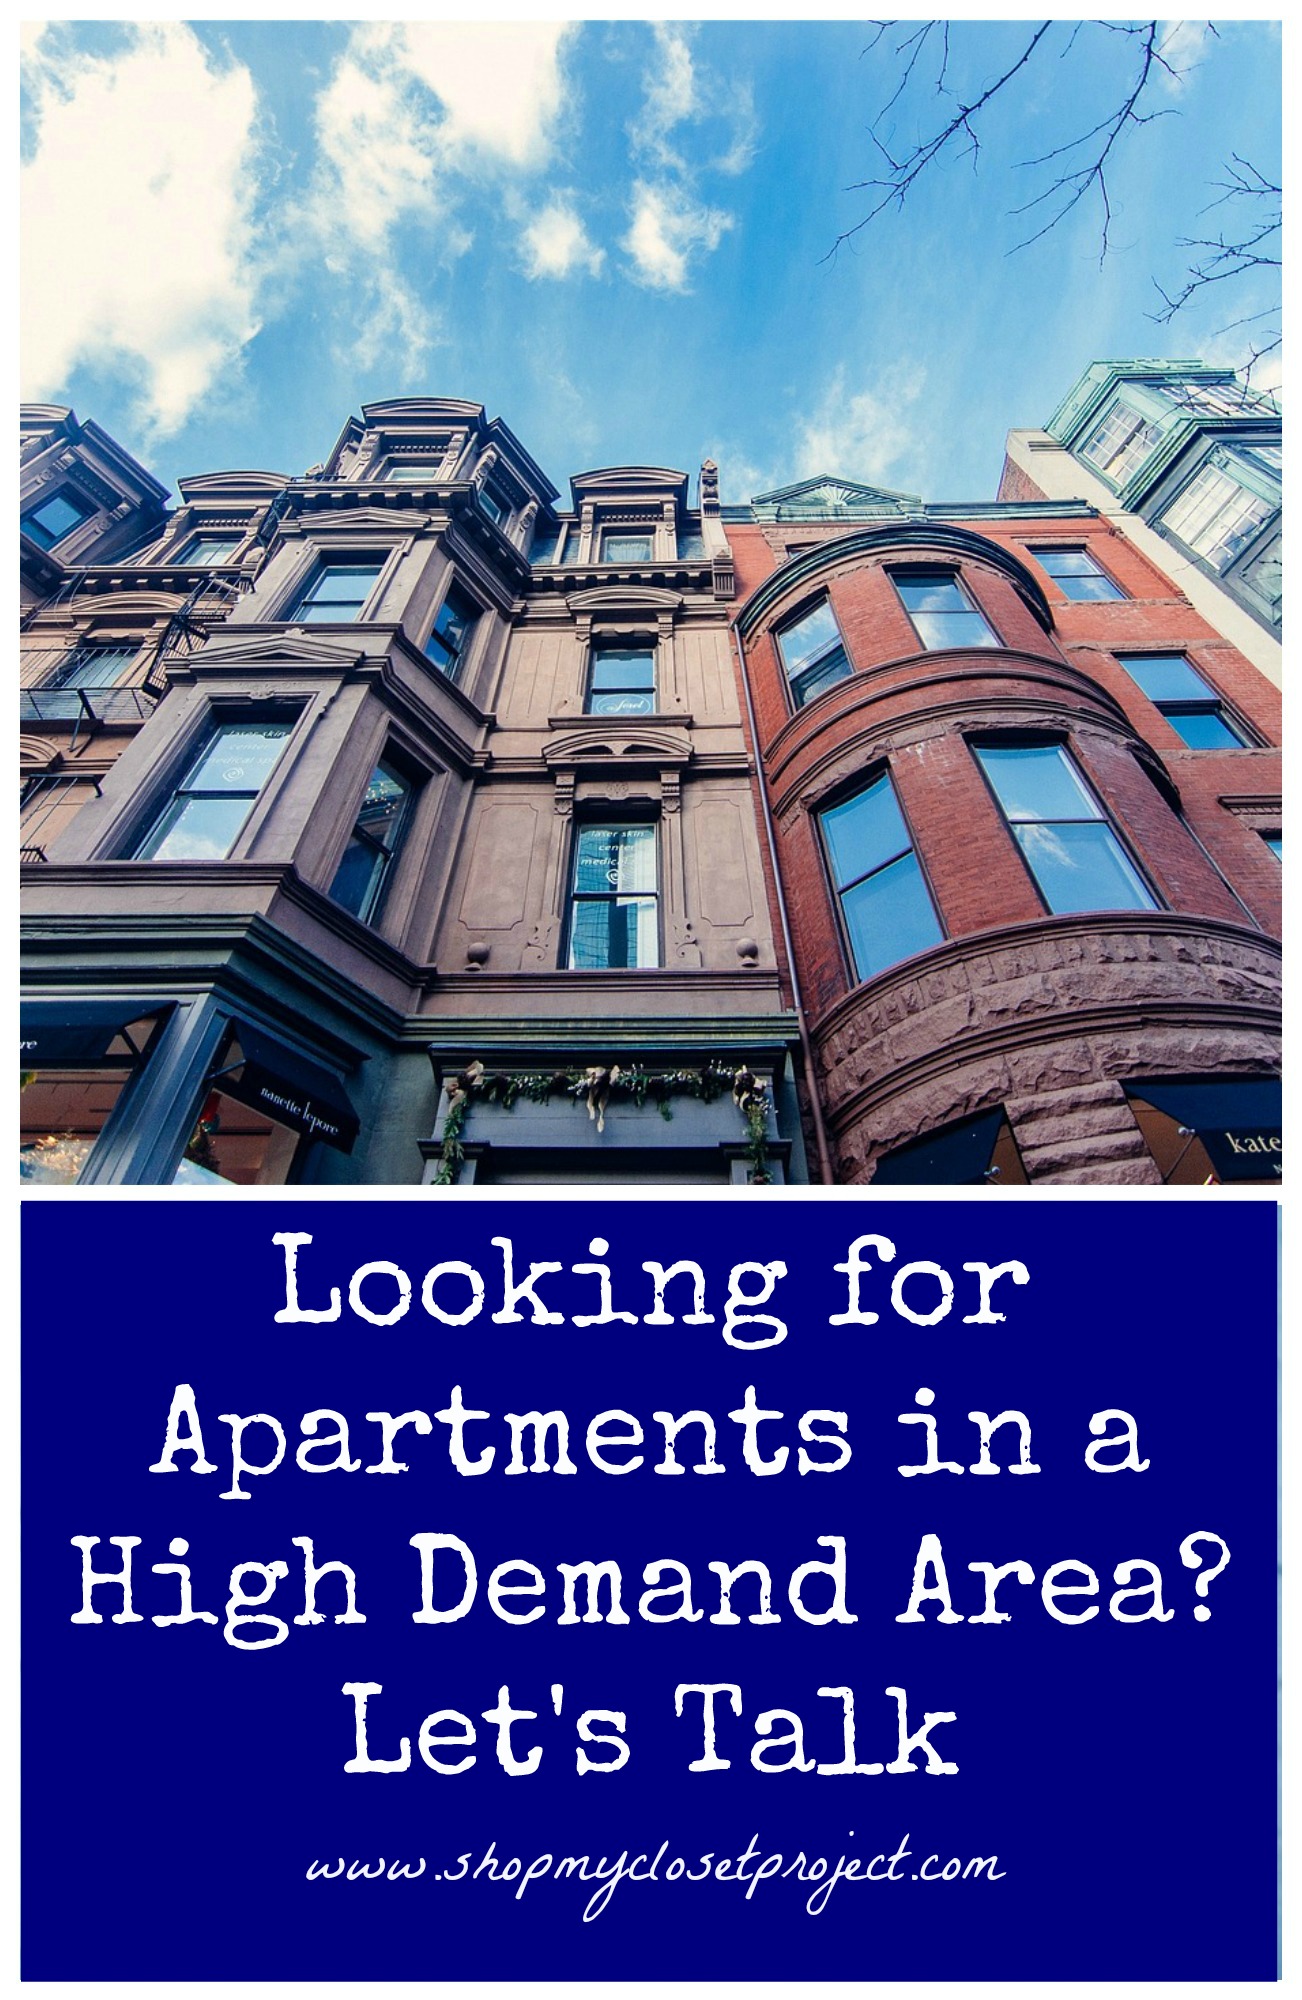 Looking for Apartments in a High Demand Area? Let’s Talk